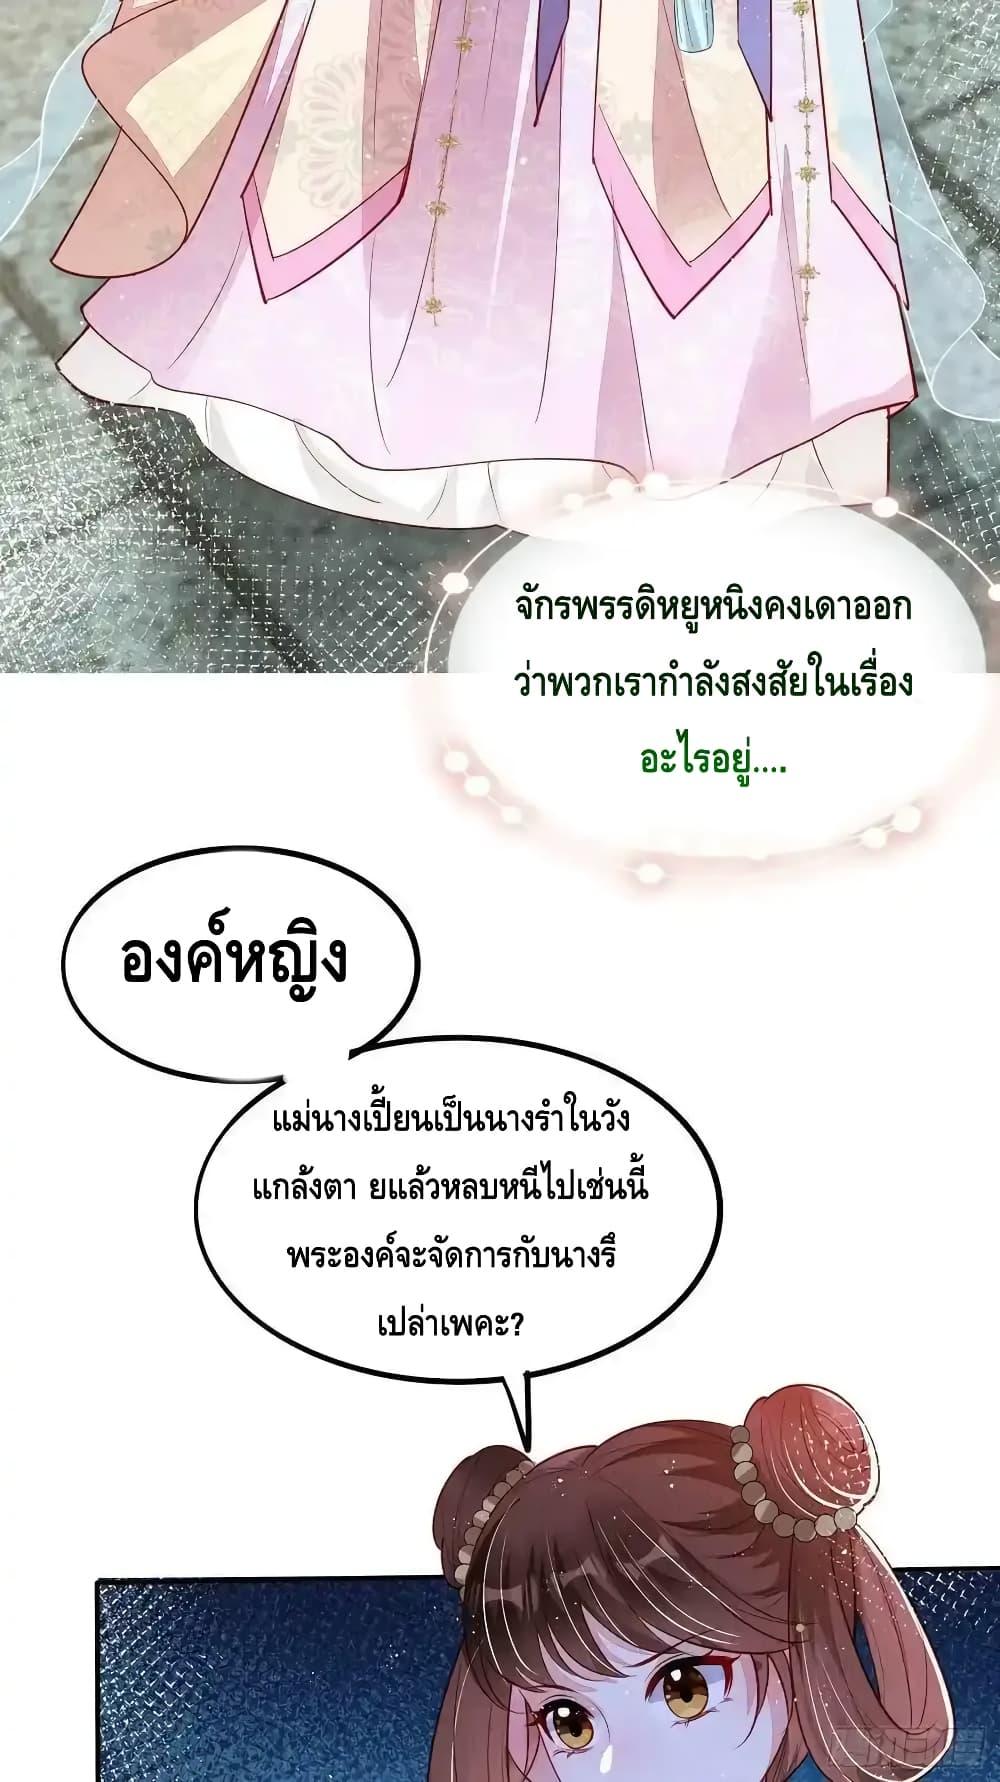 After I Bloom, a Hundred Flowers Will ill – ดอกไม้นับ ตอนที่ 70 (4)